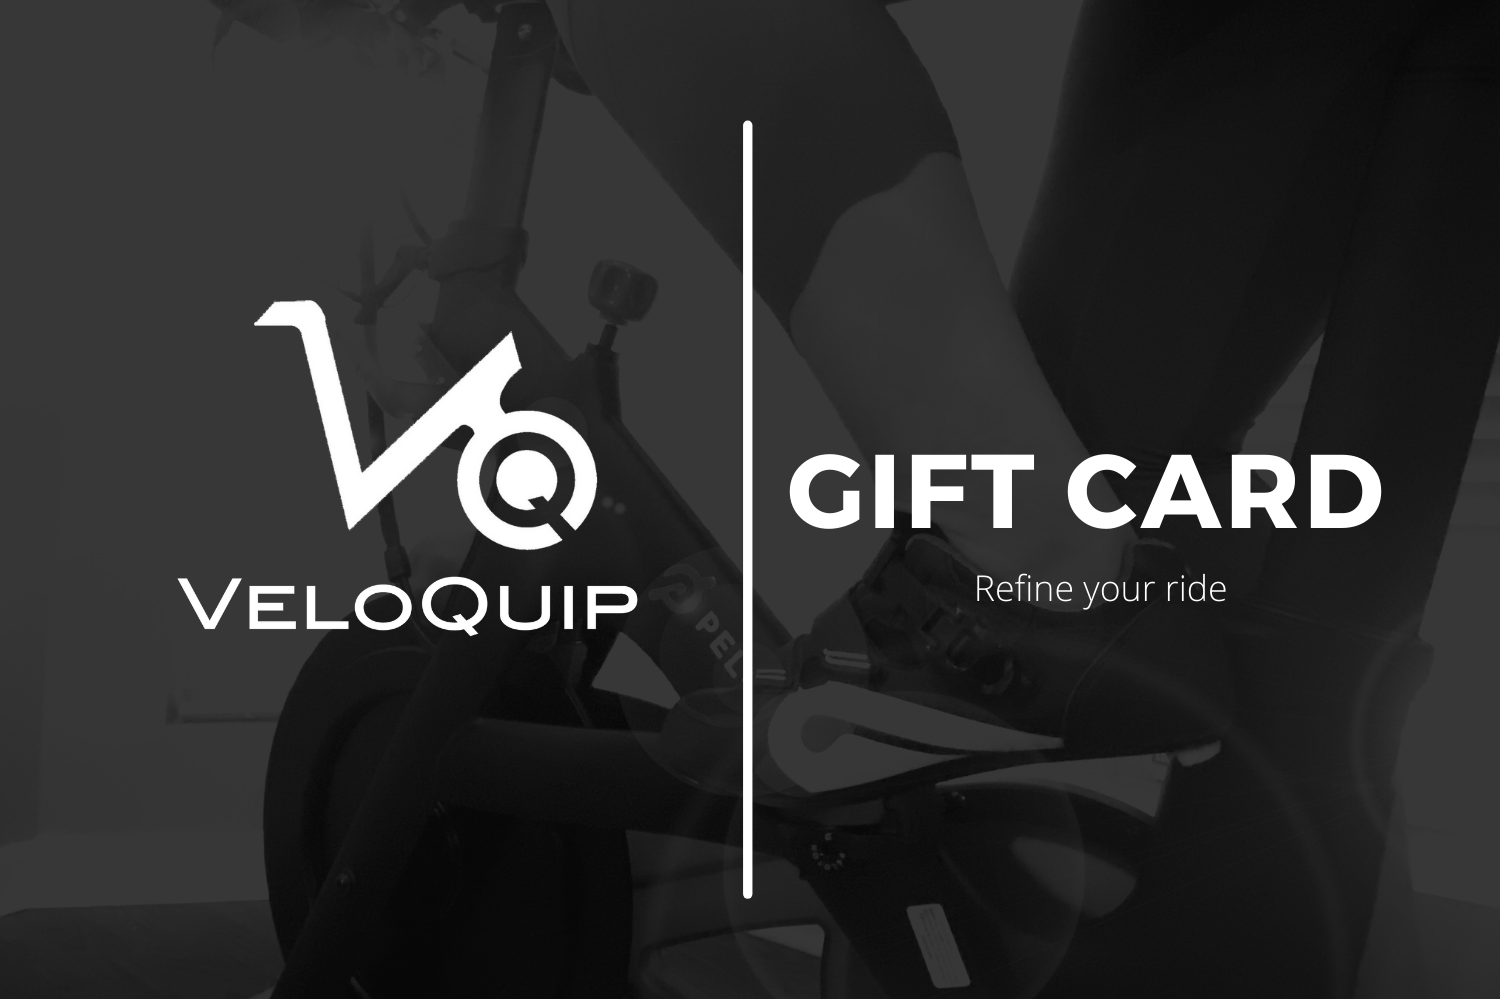 VeloQuip gift card saying "Refine Your Ride" with black and white picture of peddling bike